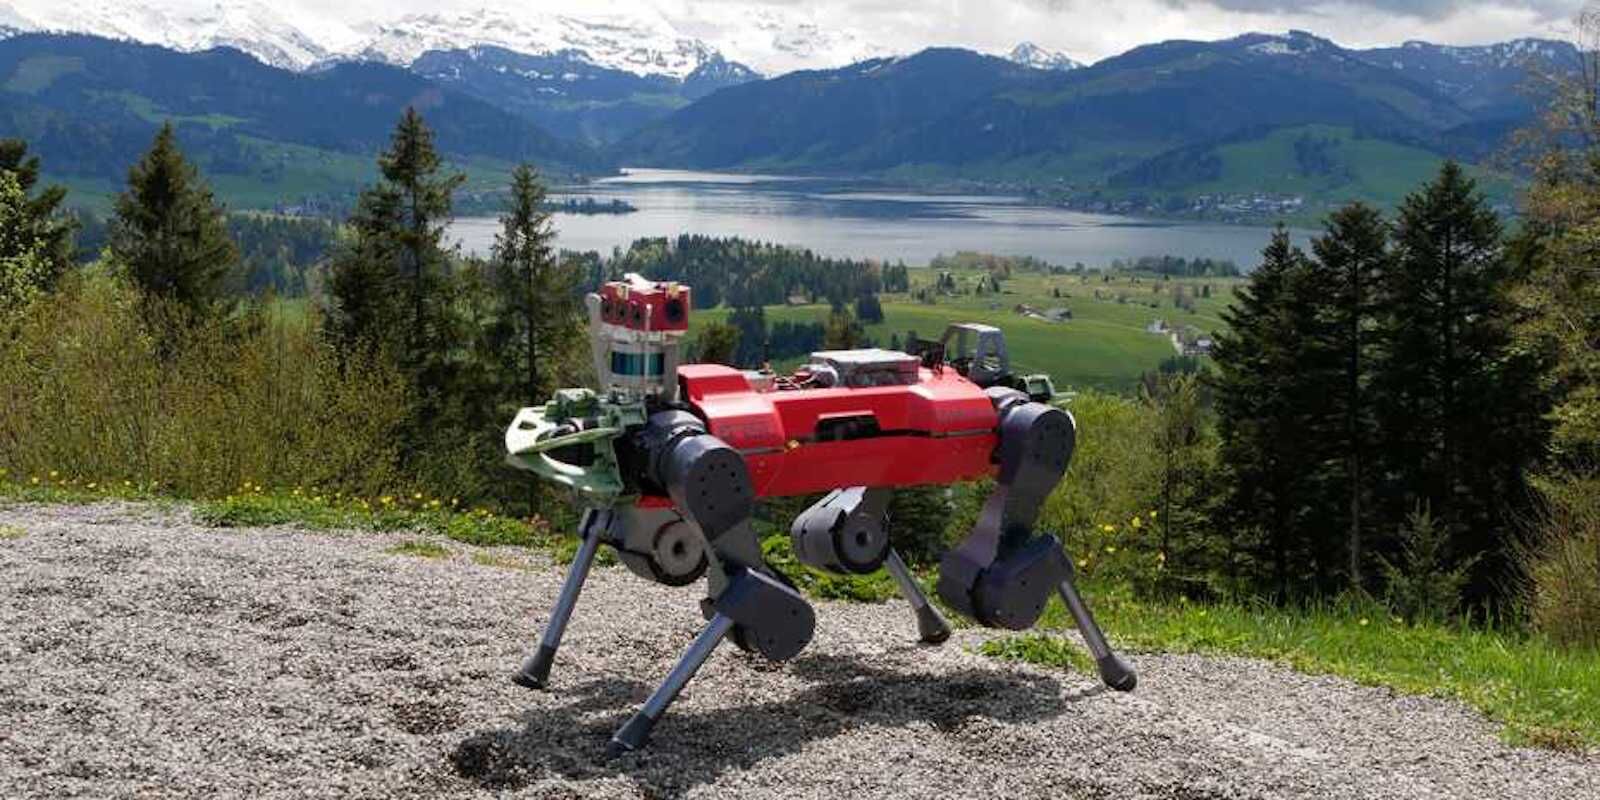 The anymal hiking robot in the wild 